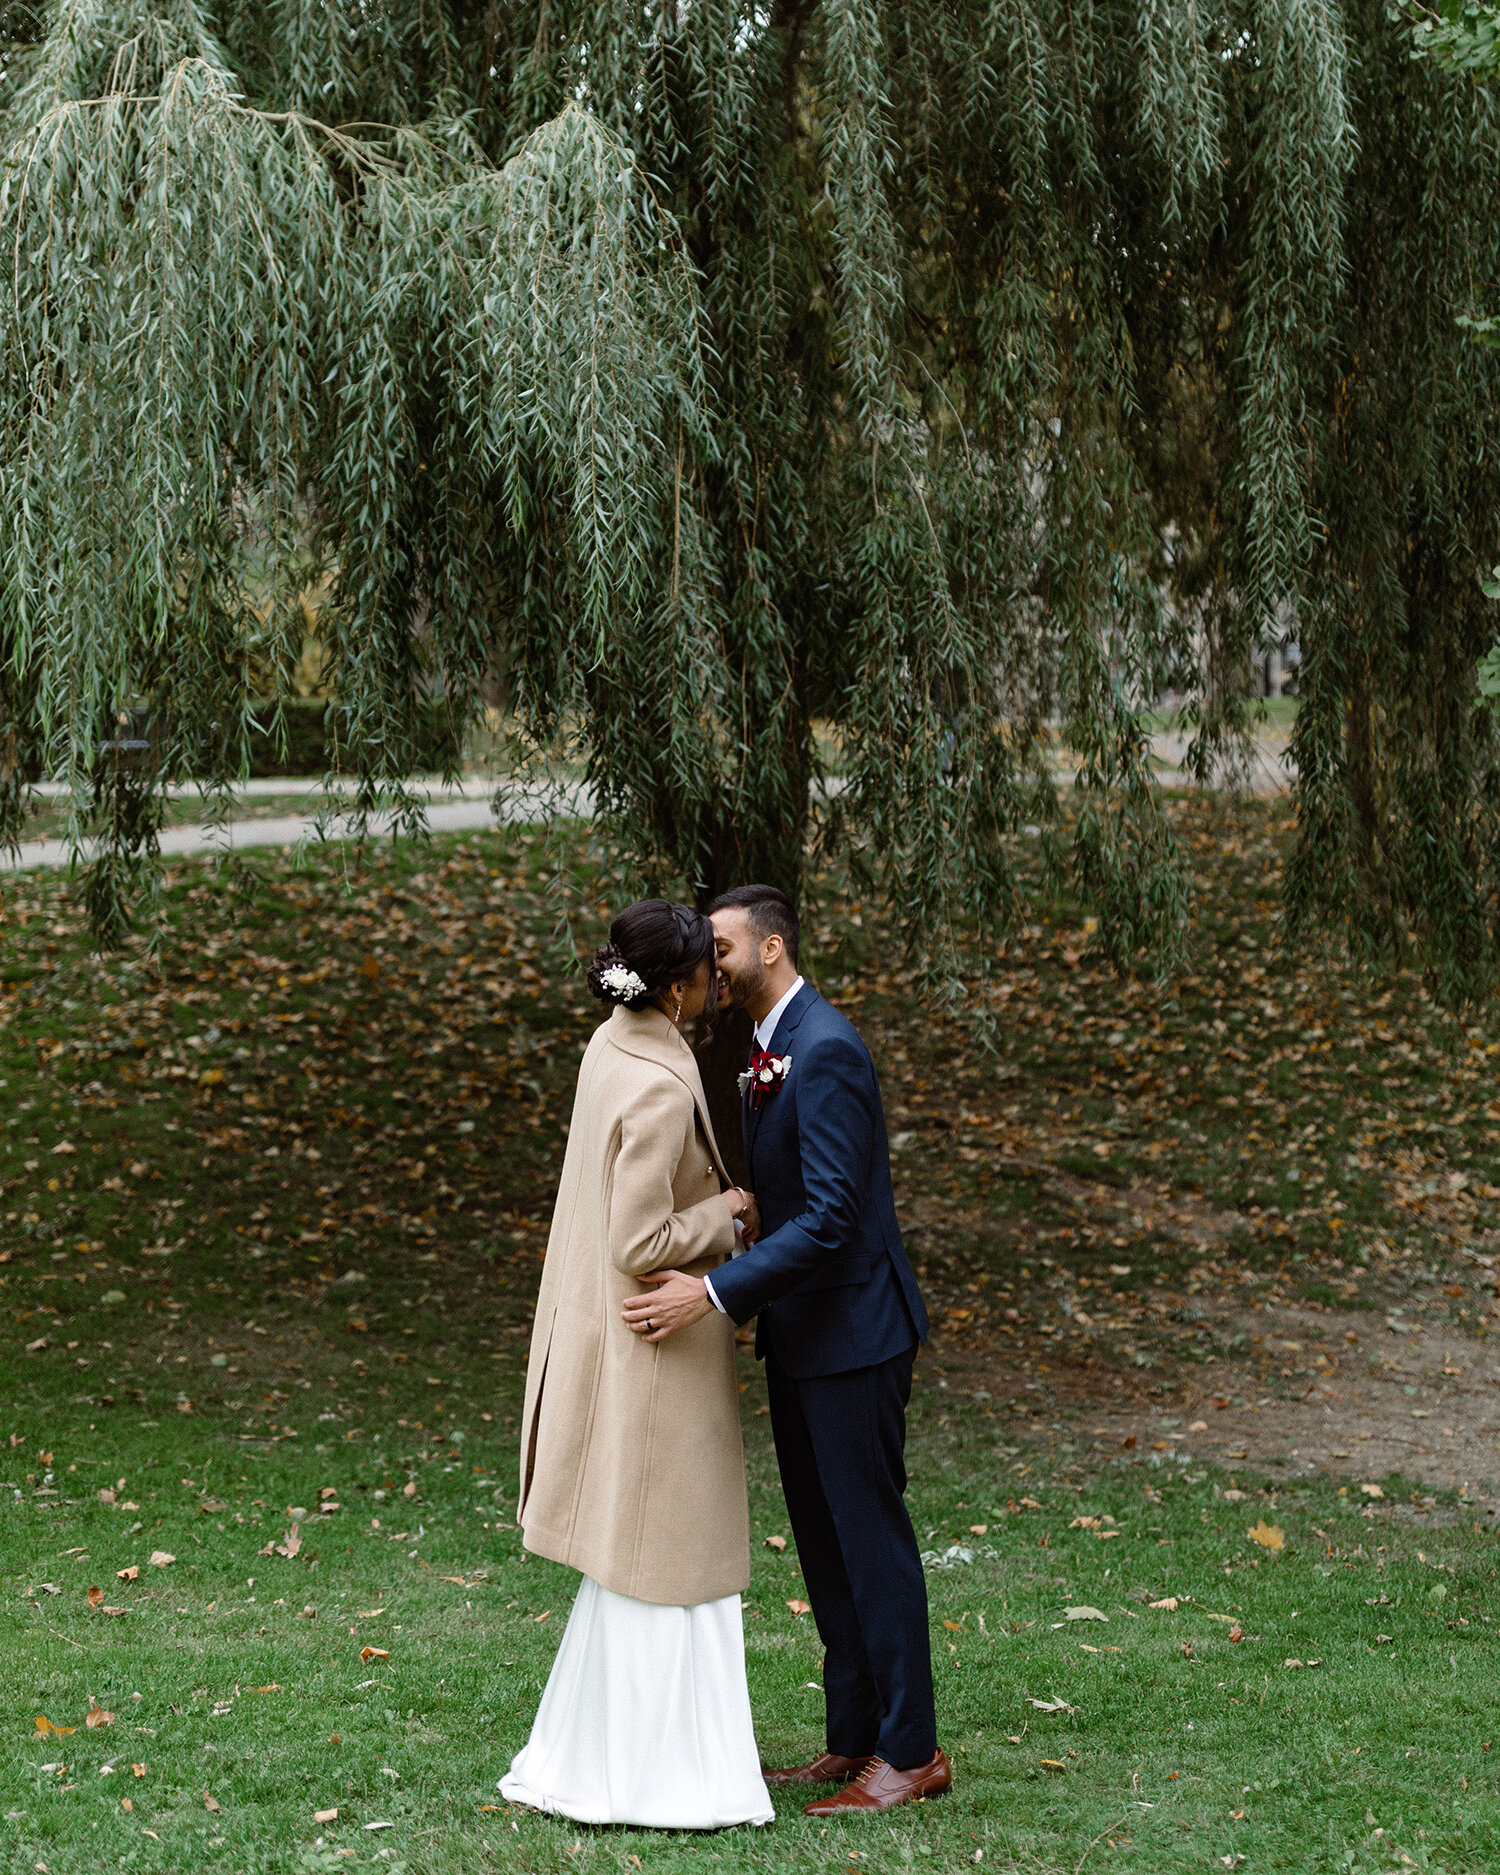 Small-Intimate-Elopement-Downtown-Toronto-U-of-T-Vows-where-to-elope-in-toronto-photography.JPG